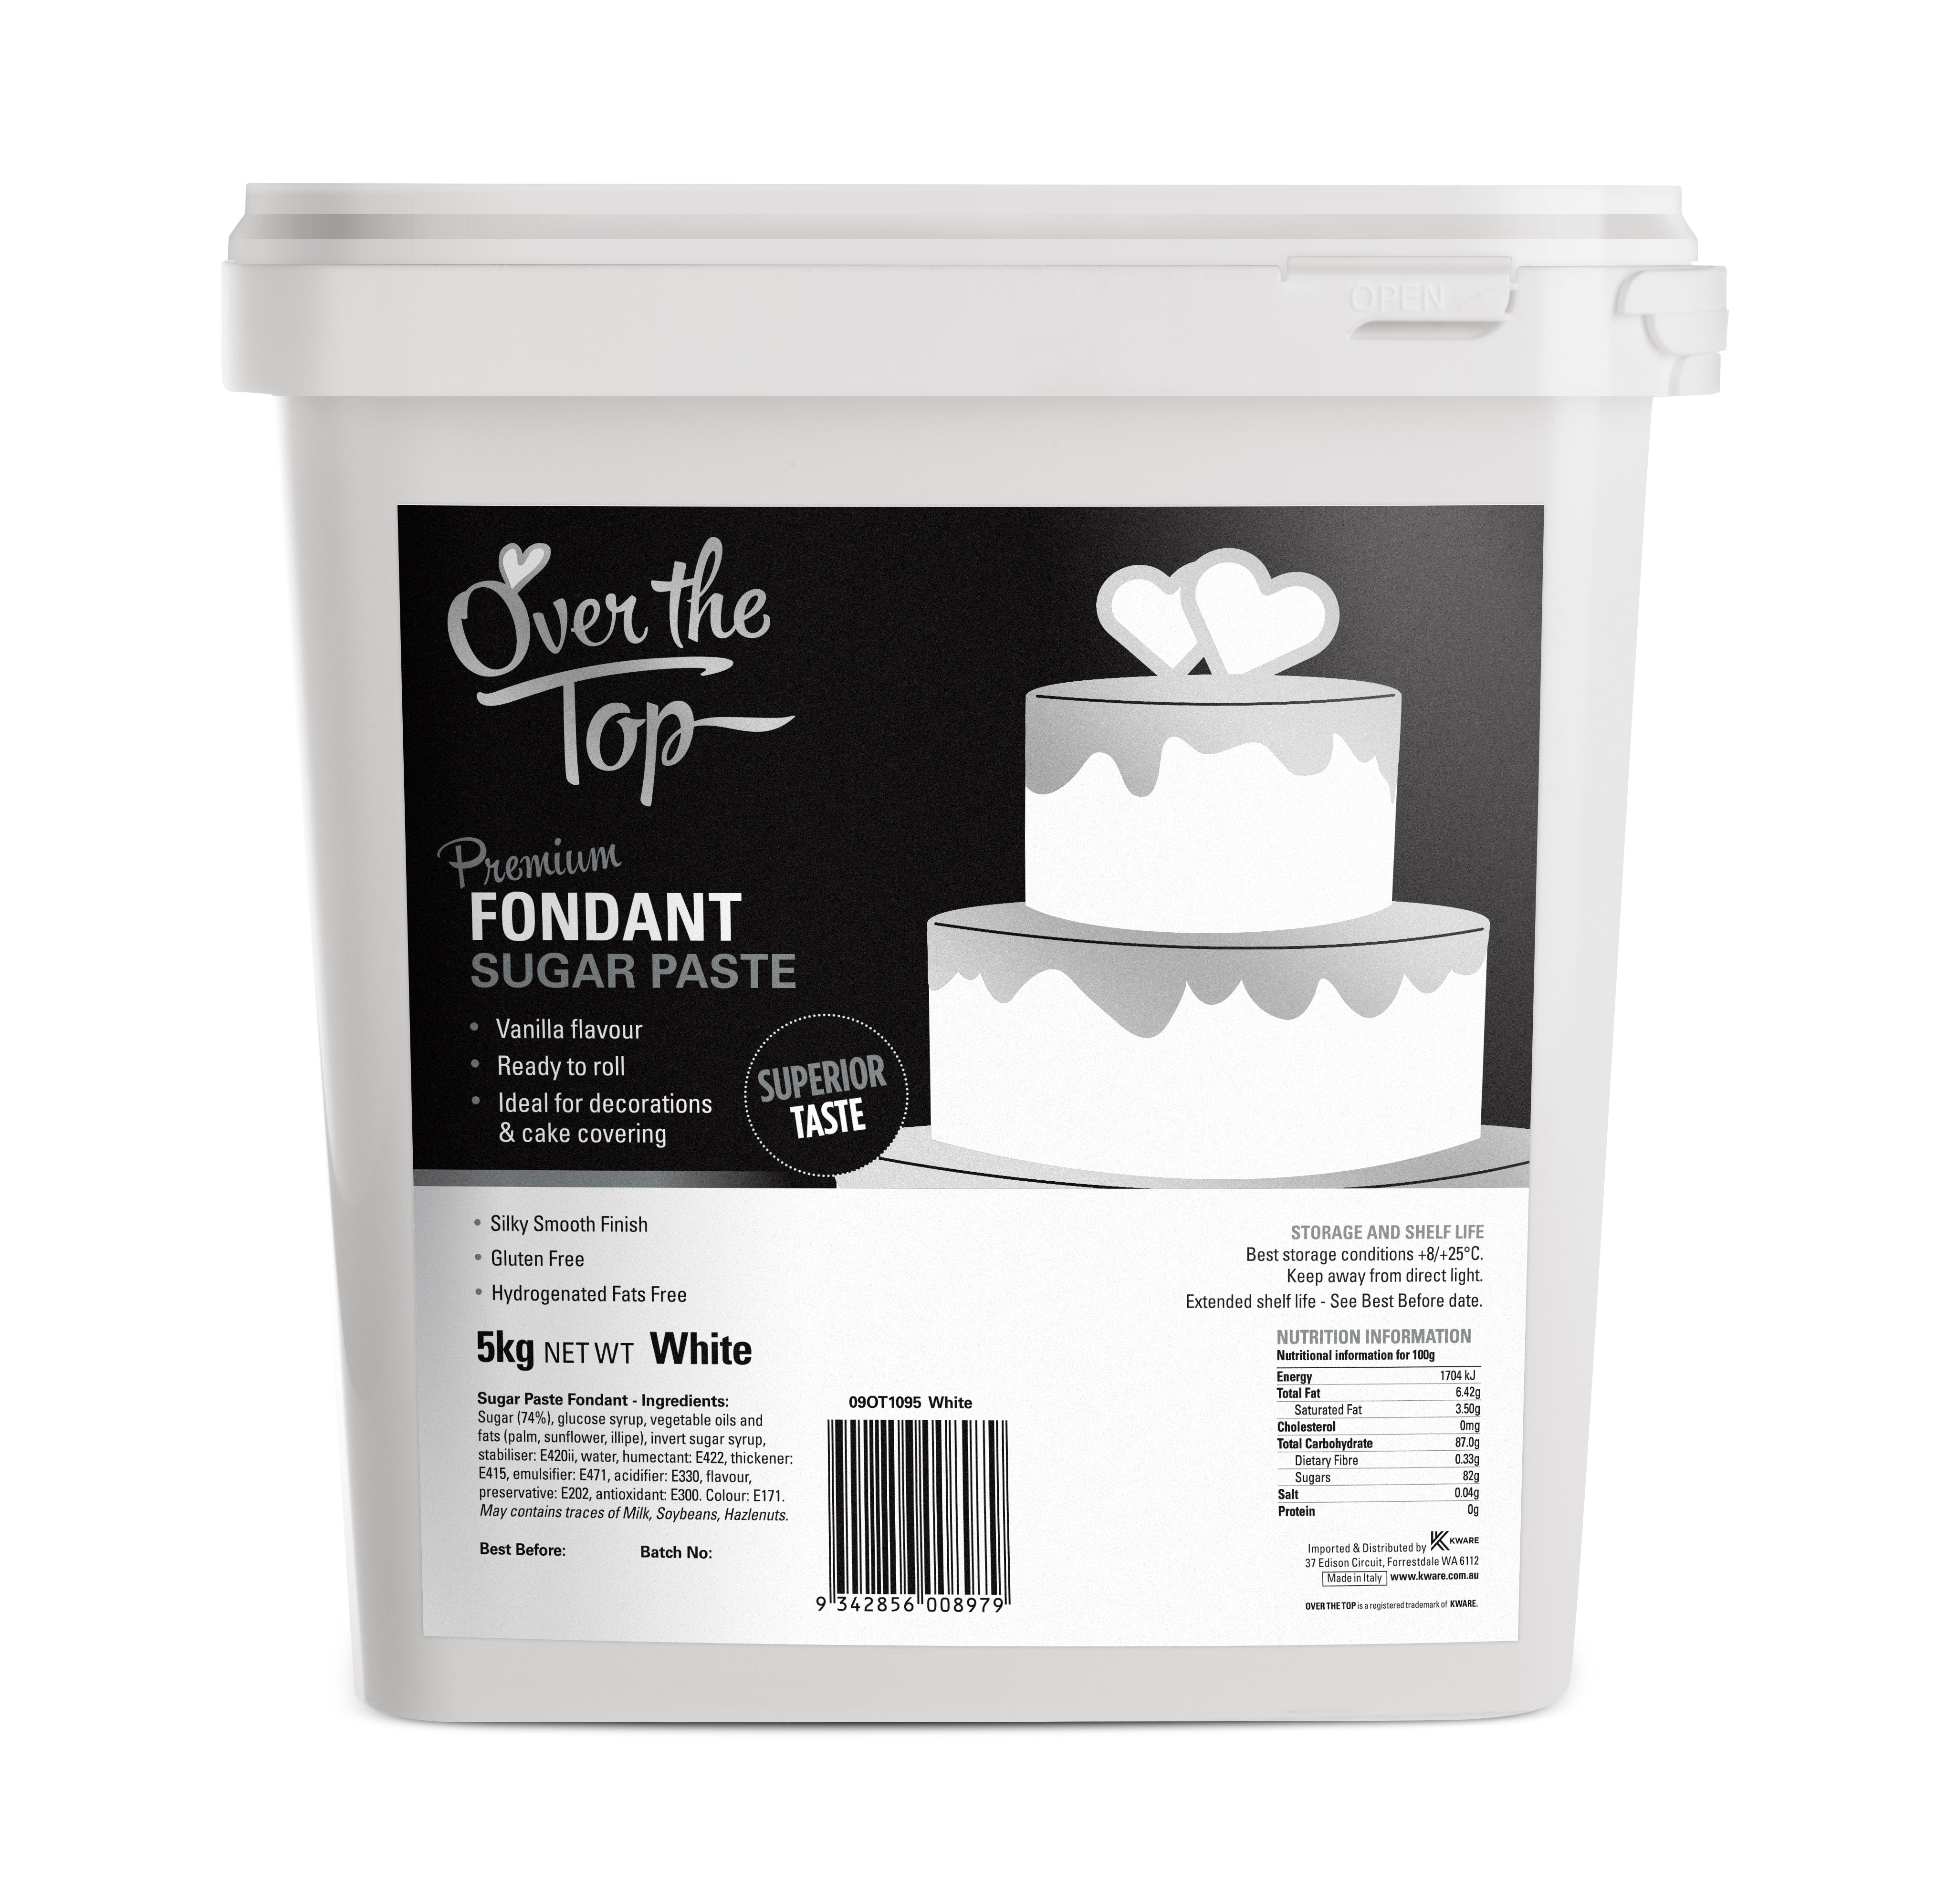 Over the top - Fondant White 5kg